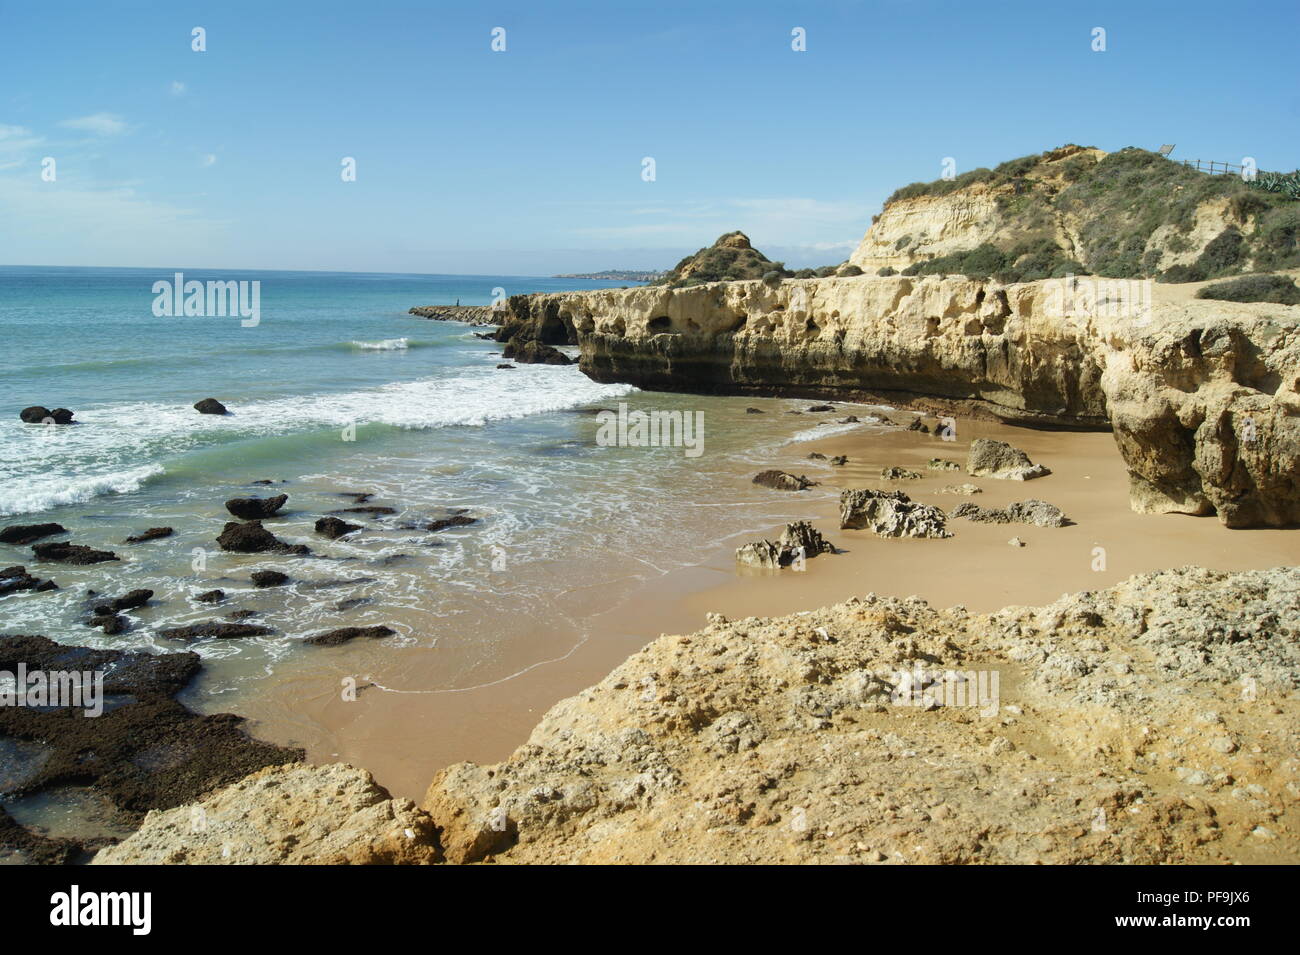 A quiet cove at the Portuguese resort of Albufeira. Atlantic waves break on to a deserted sea shore.  A winters day, with bright sunshine. Stock Photo